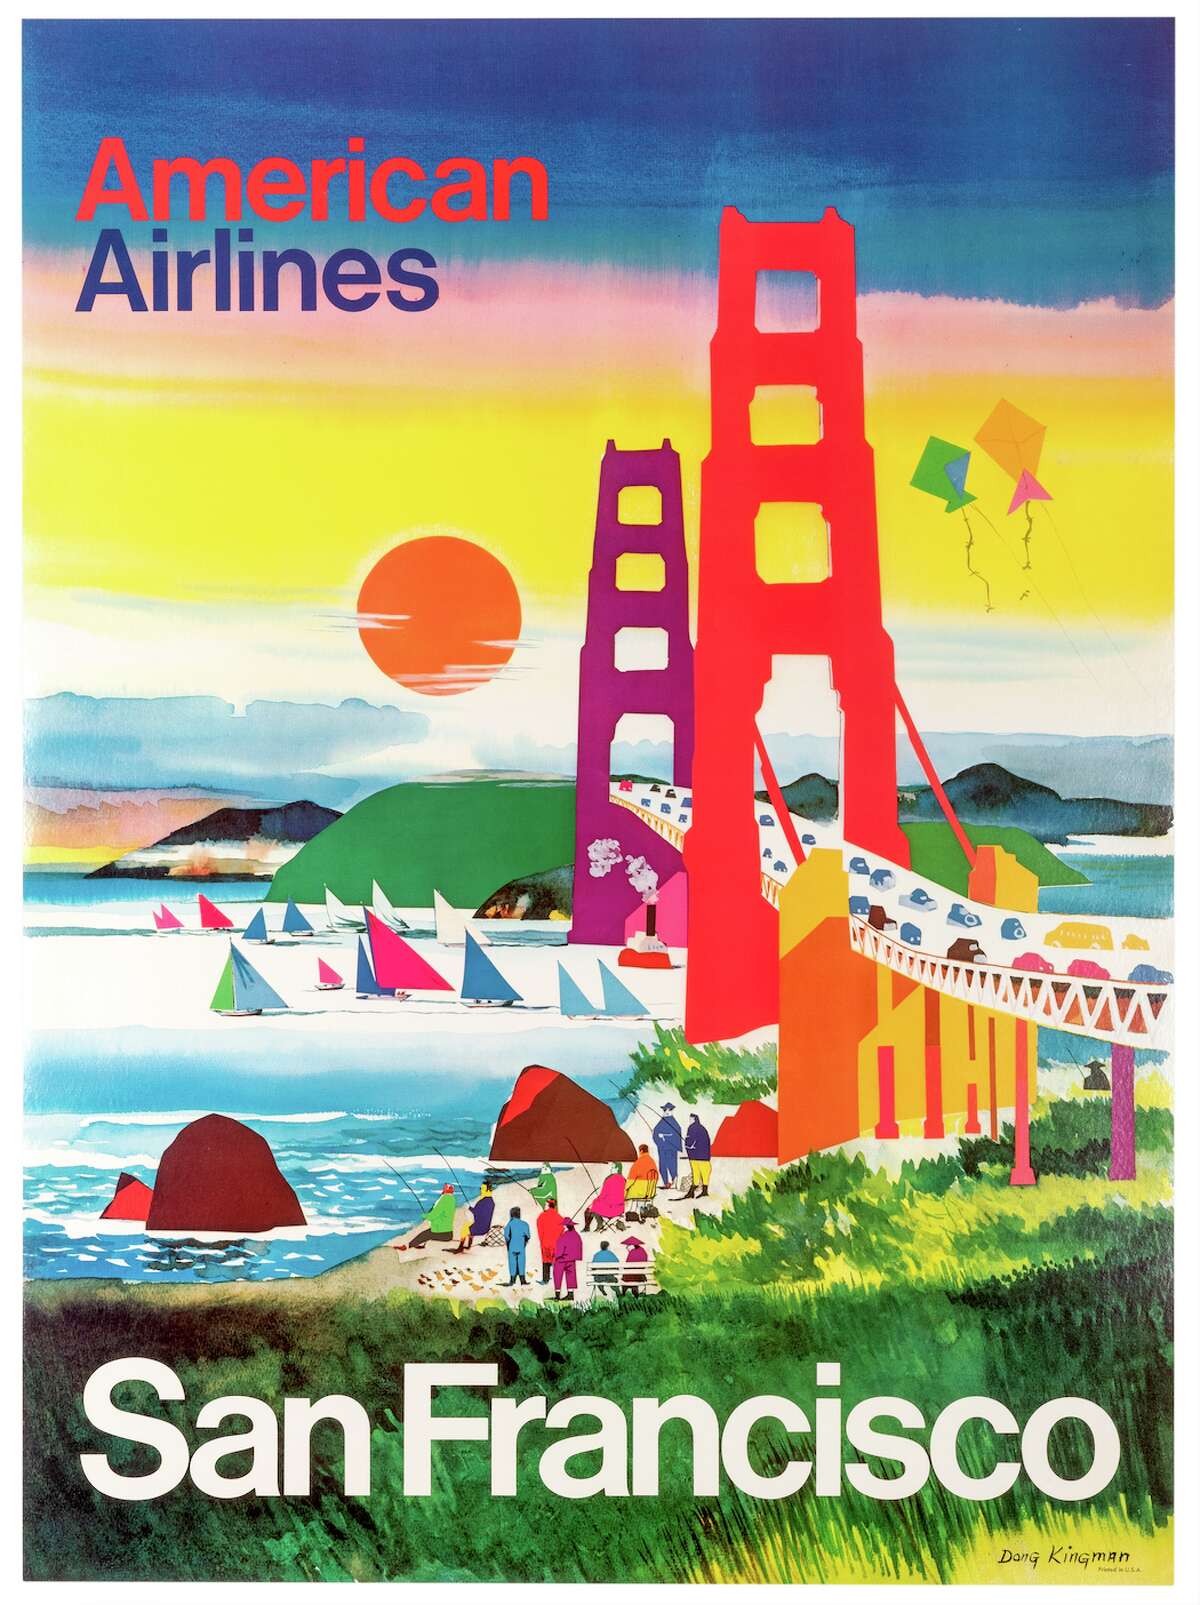 An American Airlines promotional poster designed by Dong Kingman in 1970.